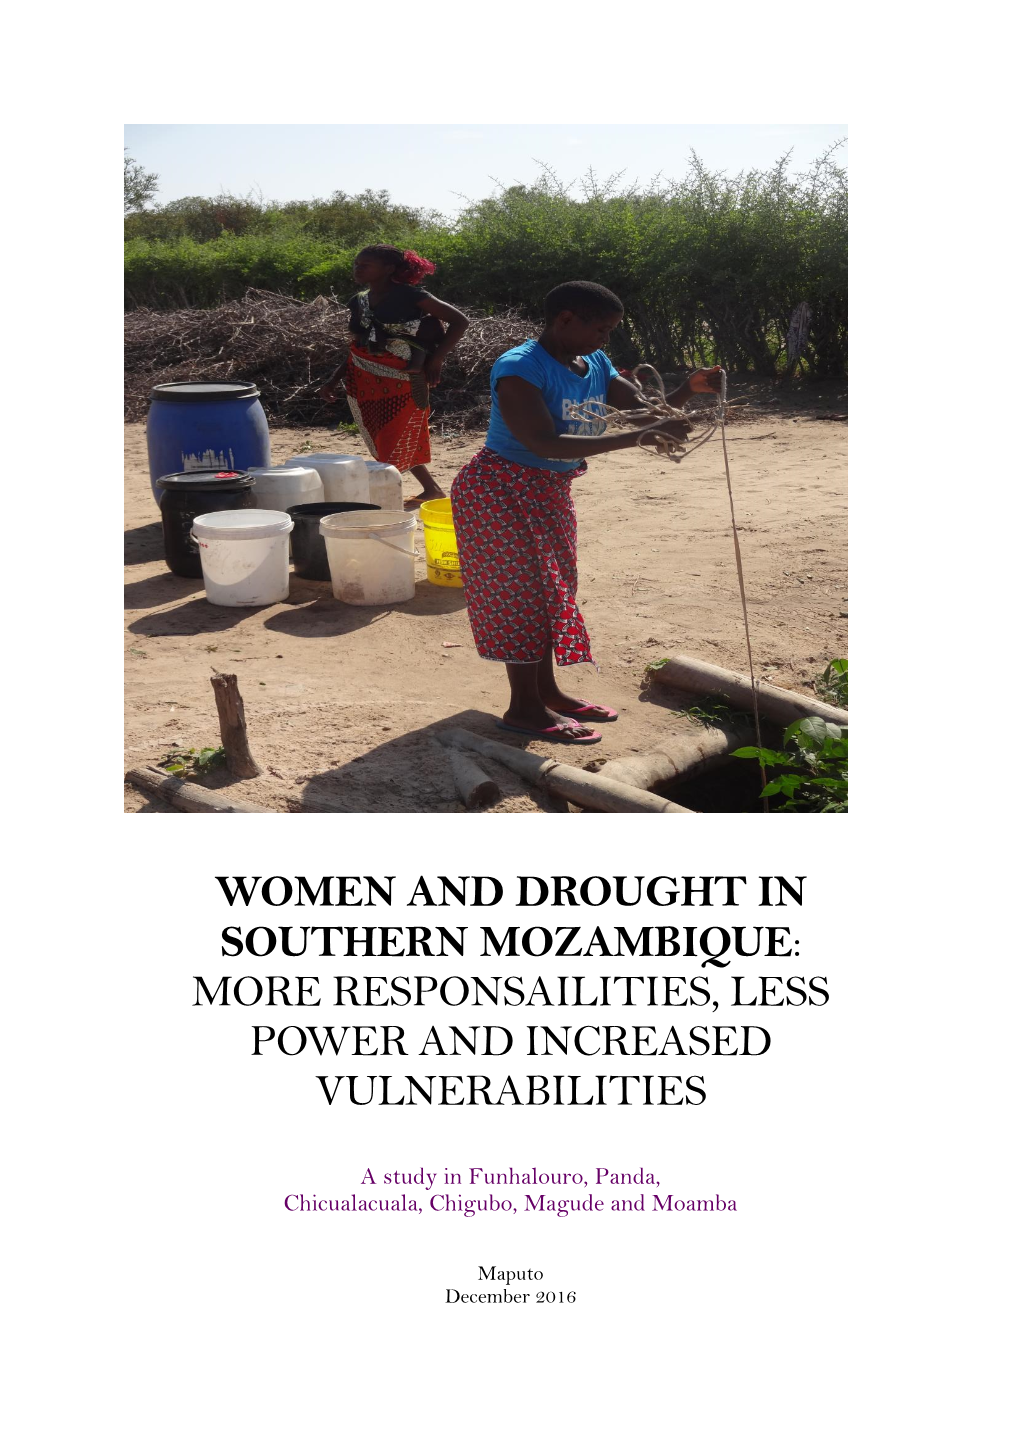 Women and Drought in Southern Mozambique: More Responsailities, Less Power and Increased Vulnerabilities